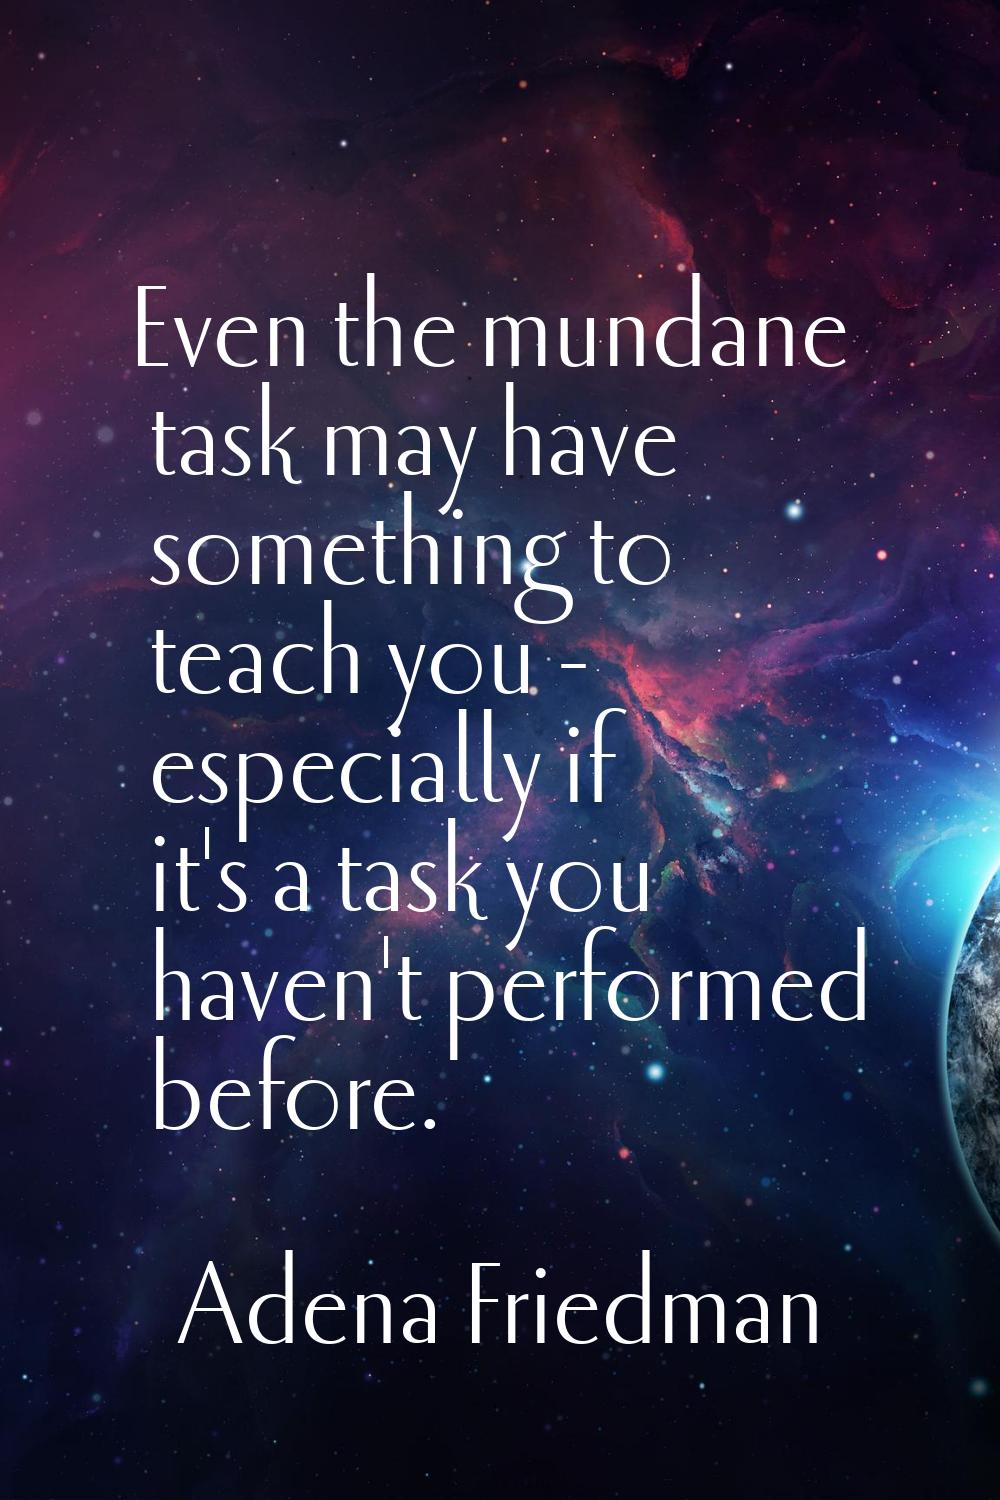 Even the mundane task may have something to teach you - especially if it's a task you haven't perfo